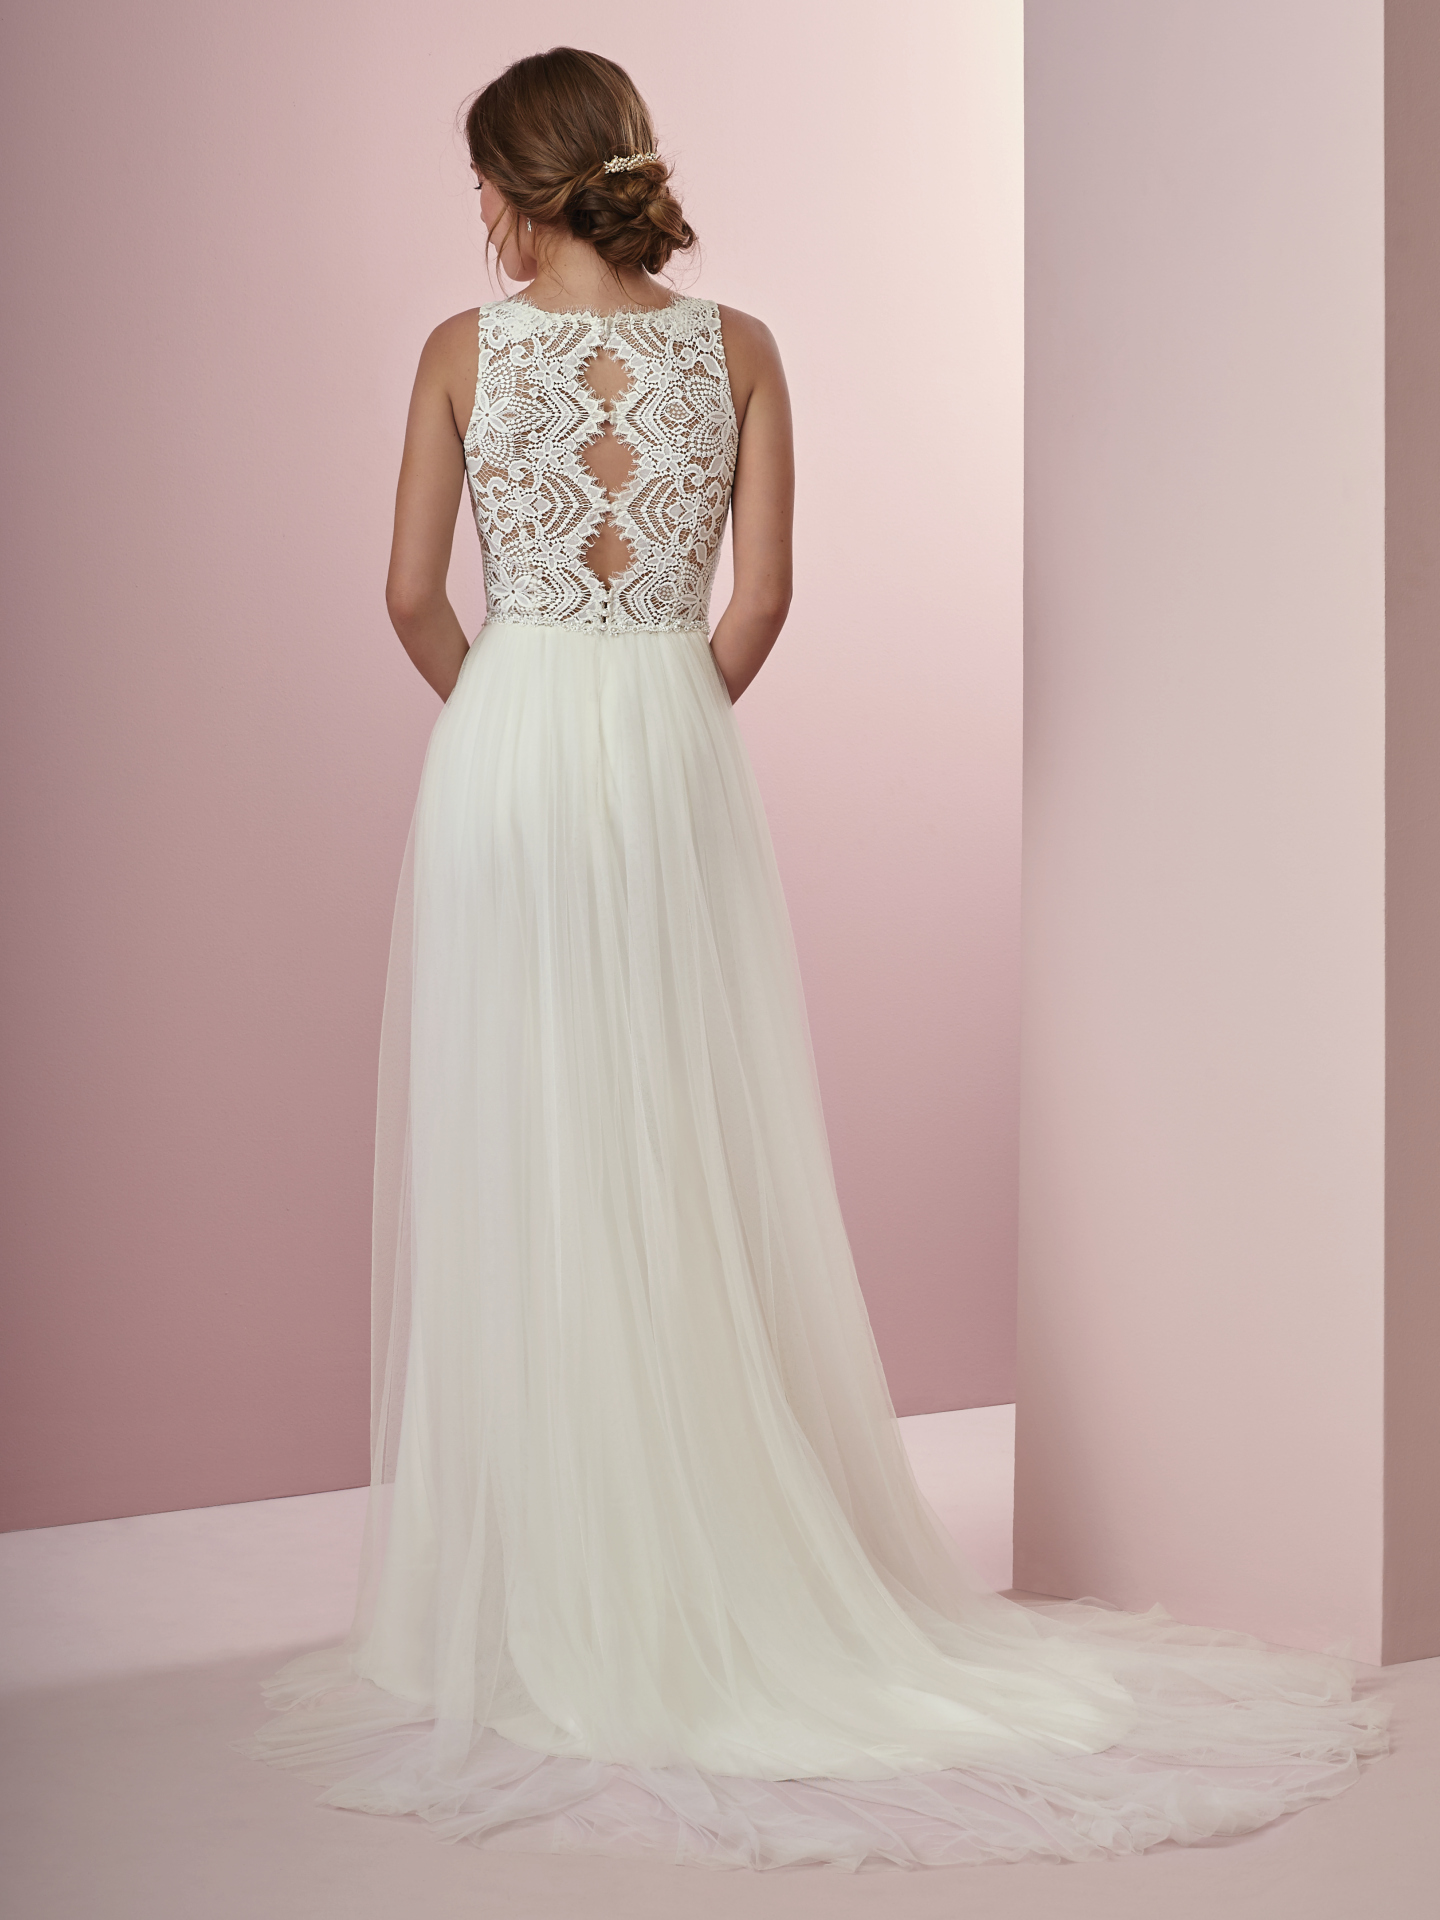 10 relaxed wedding dresses from our Camille collection by Rebecca Ingram - Choose Connie for sweet, simple, and chic.